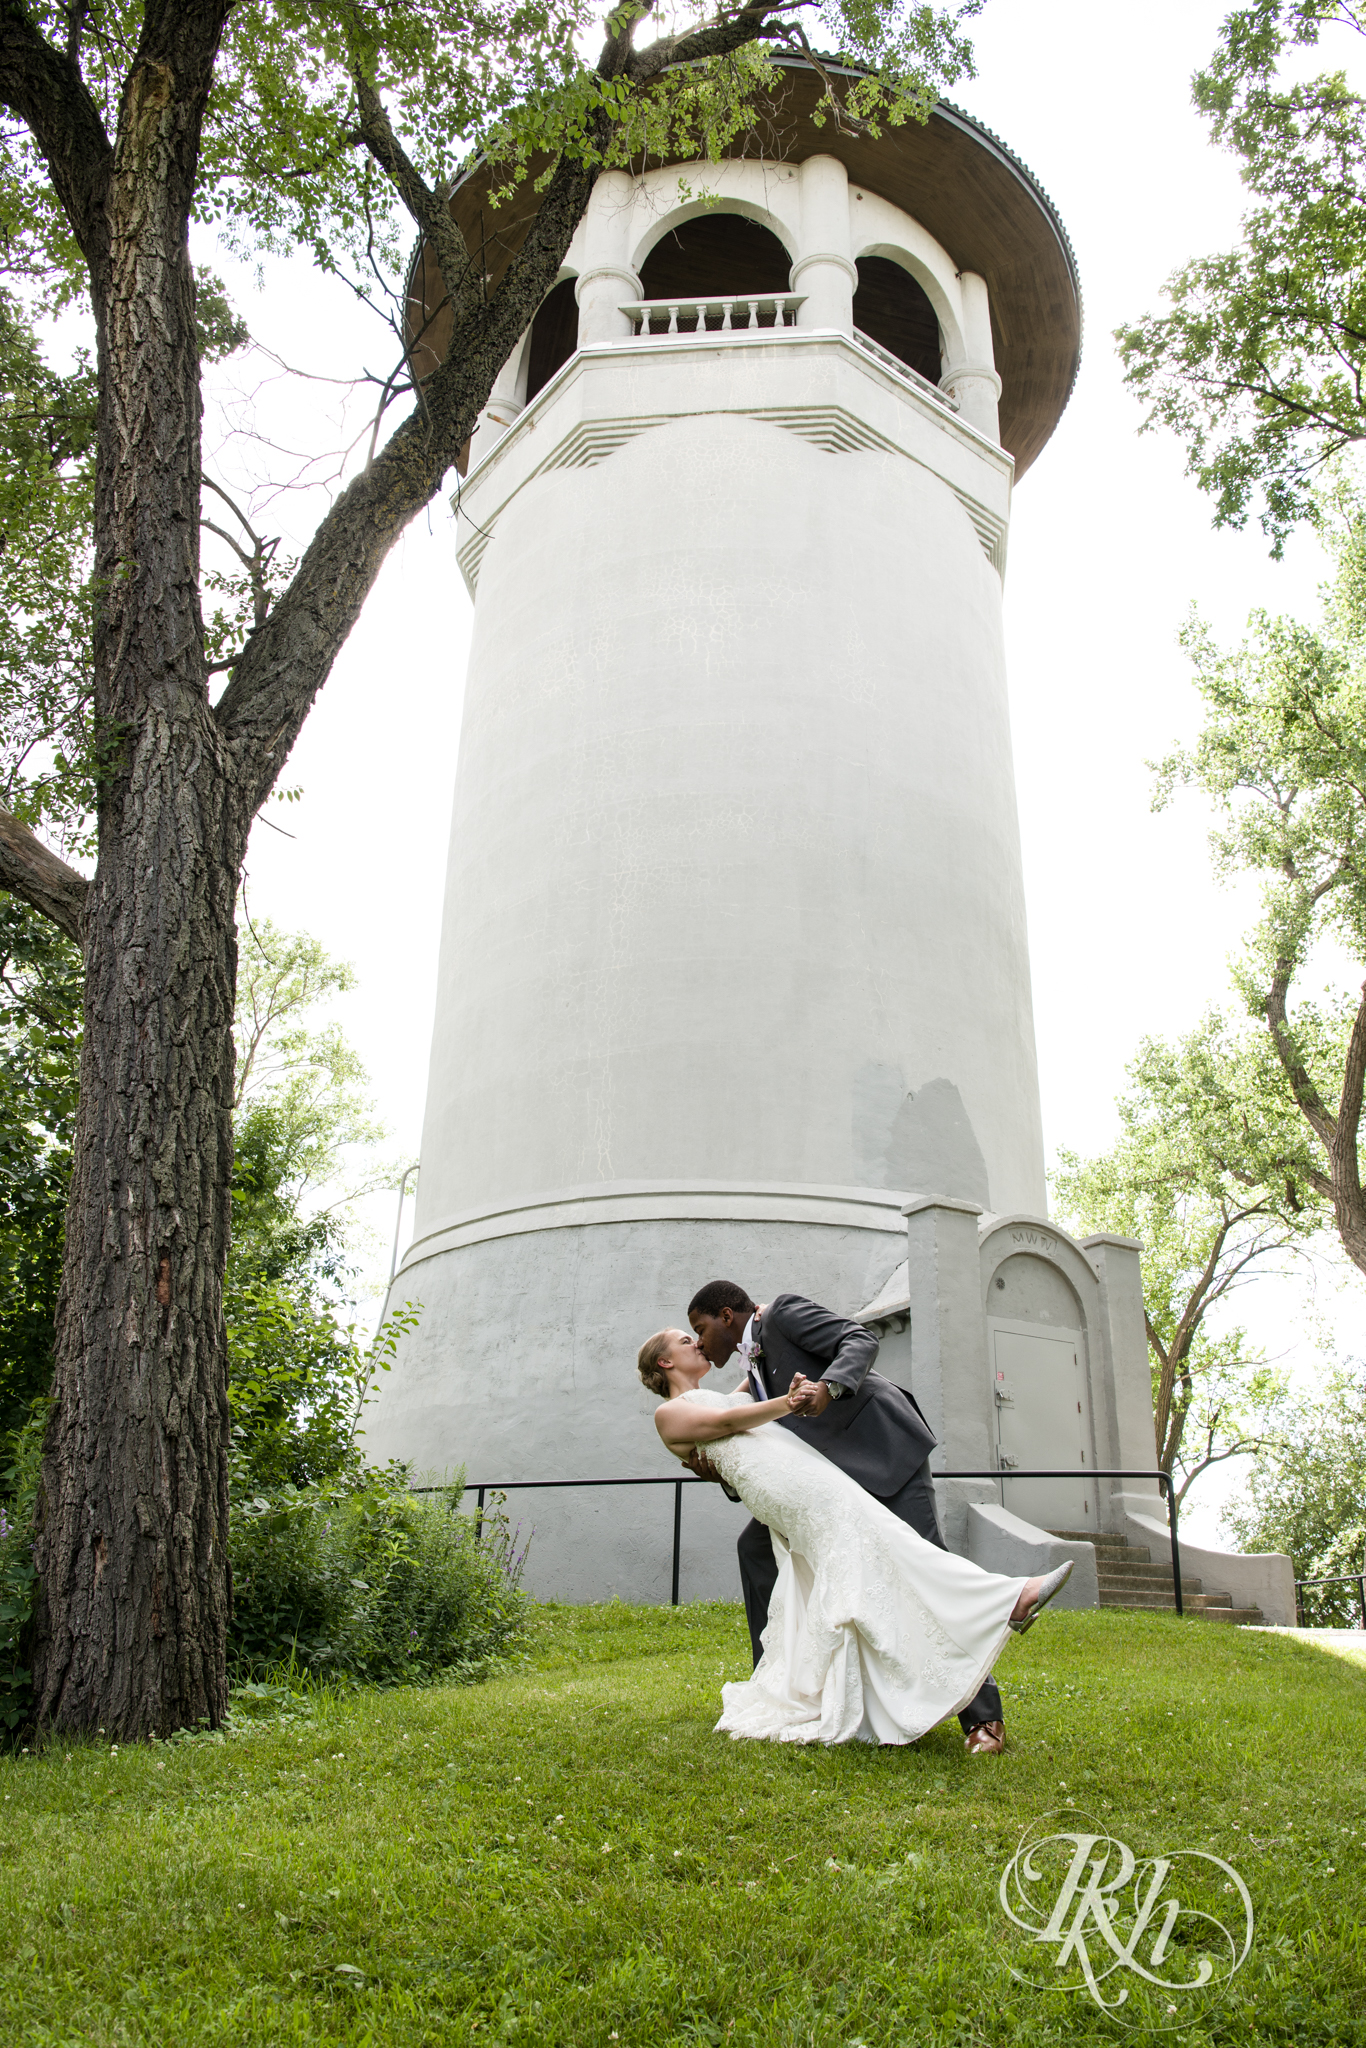 Black groom and white bride kiss at Witches Hat in Saint Paul, Minnesota.